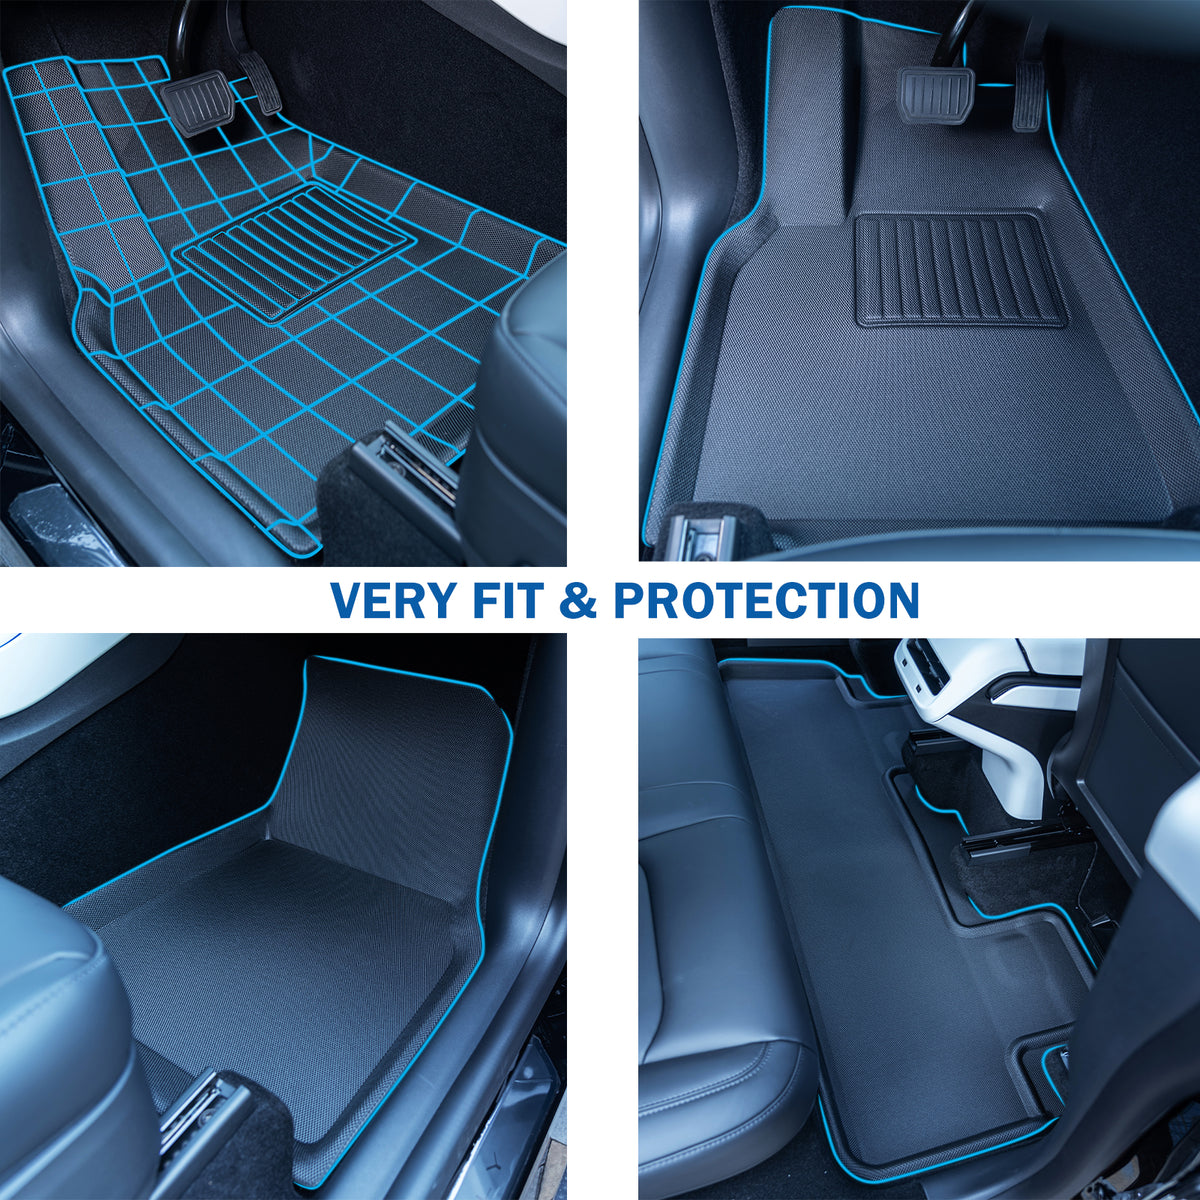 TUROAZ All Weather Floor Mats Compatible with Tesla Model Y 7 Seater 2023 2022 2021, Custom 3D Fit Front Rear Tray, Cargo Liner, Trunk, Car Interior Accessories, Waterproof Snowproof (Set of 9)